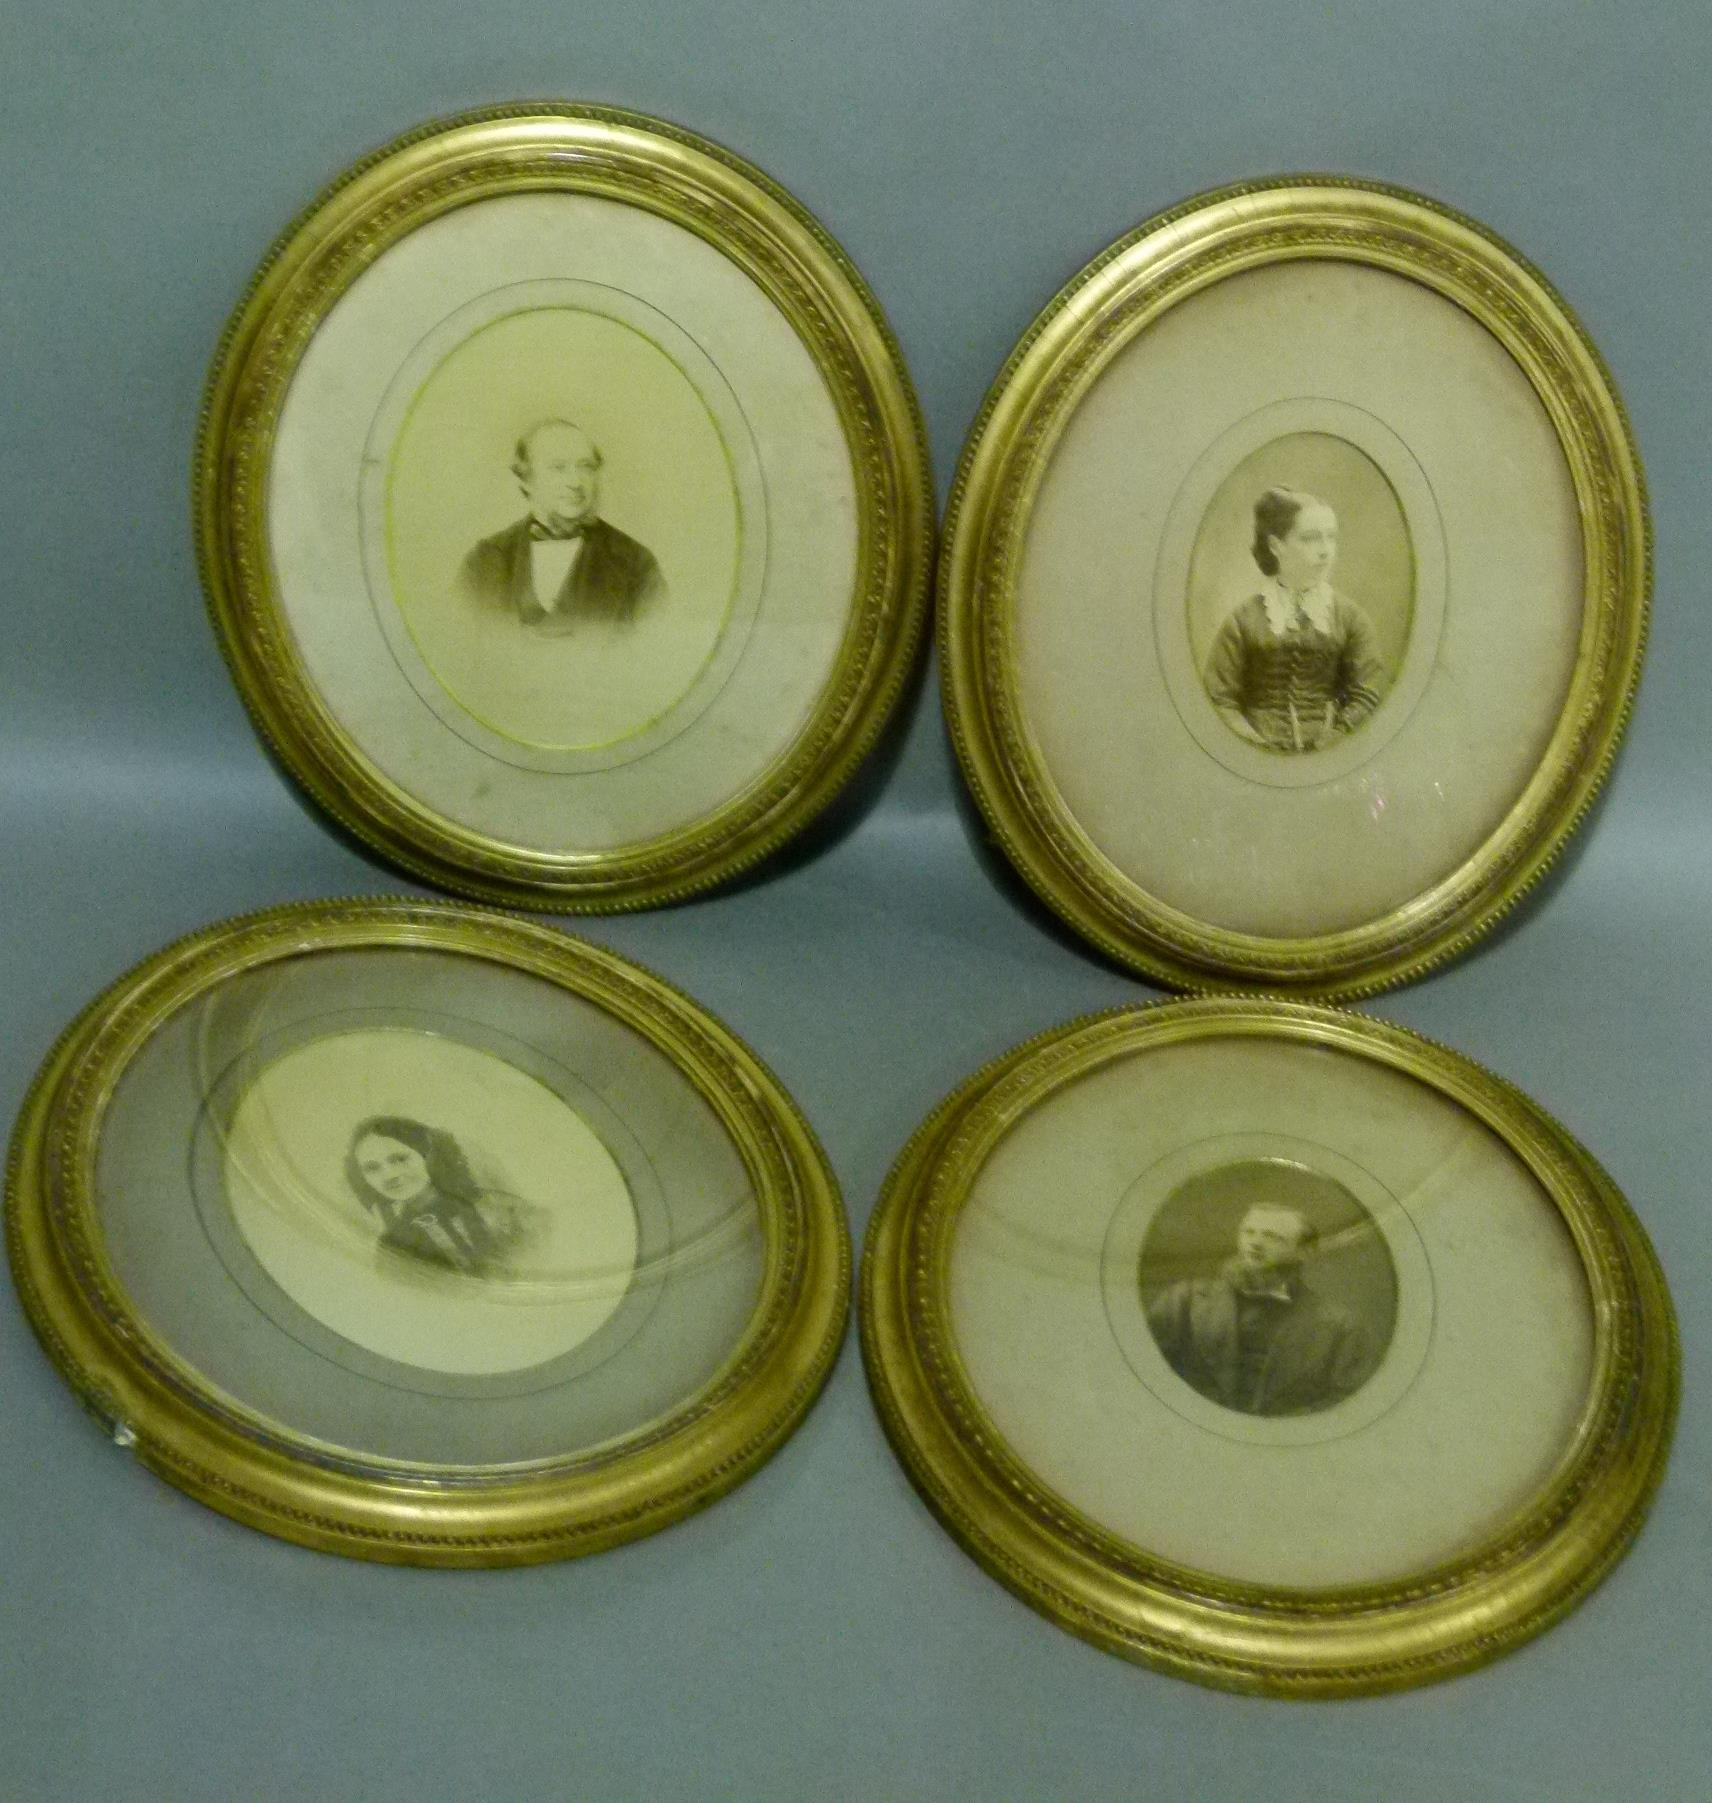 A set of four Edwardian gilt framed photographs, head and shoulder portraits within guilloche and